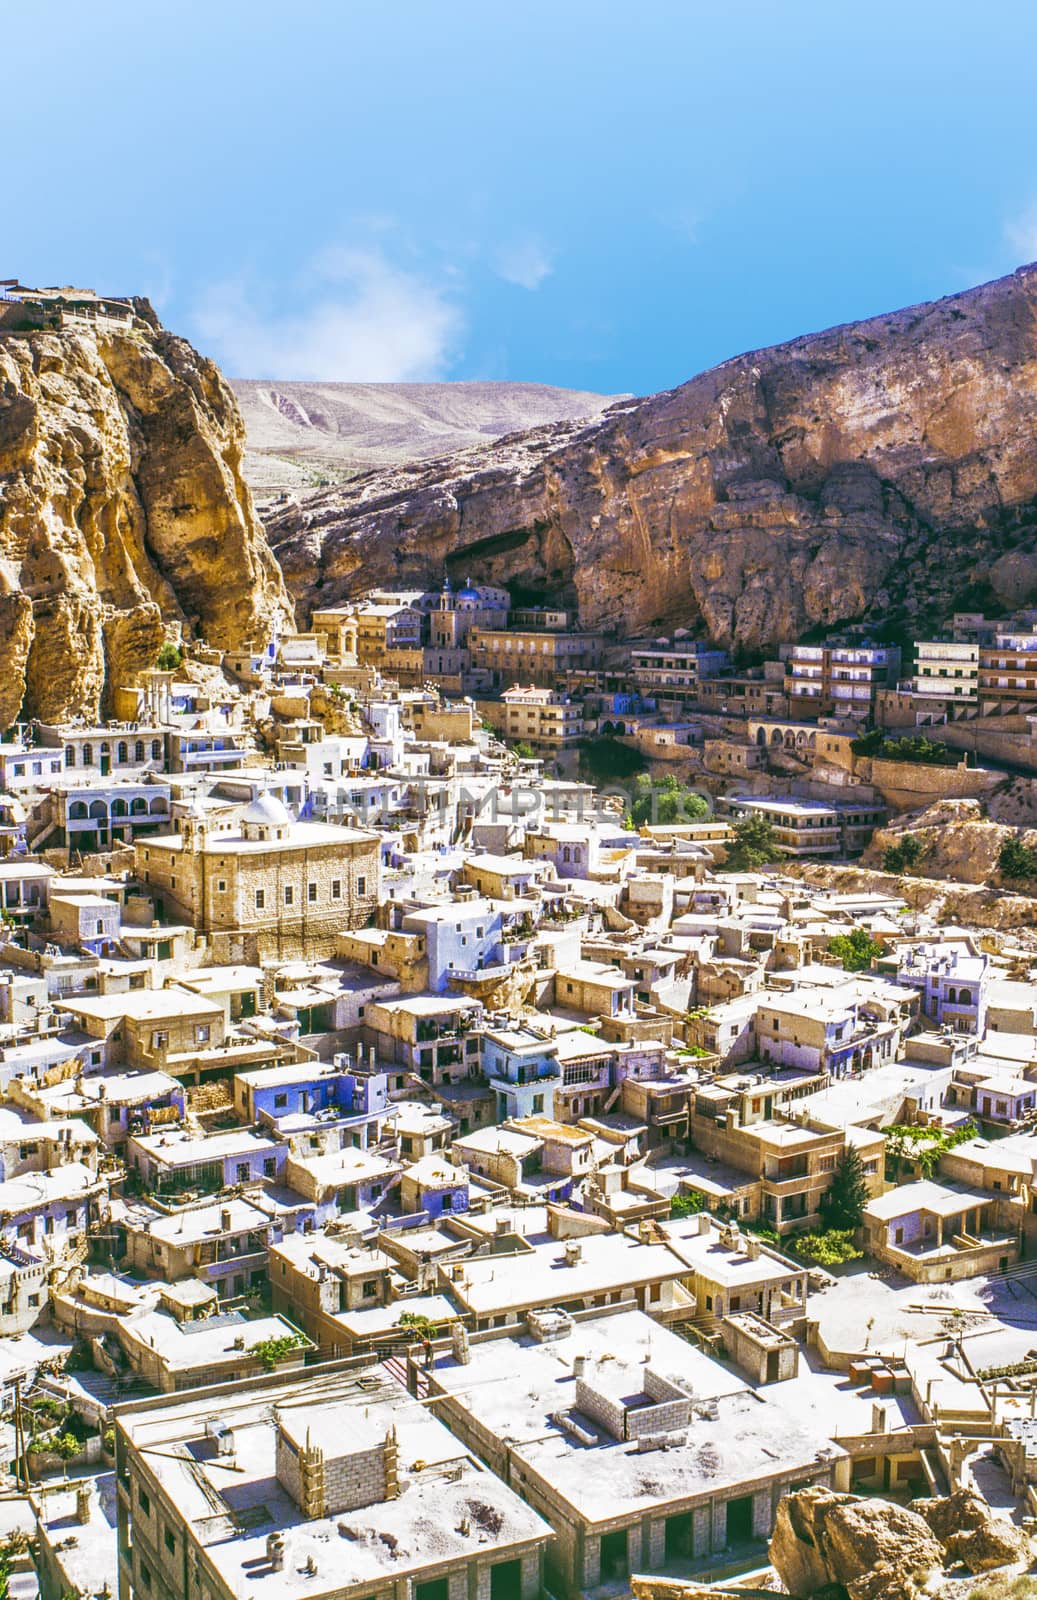 Ma'loula or Maaloula, a small Christian village in the Rif Dimashq Governorate in Syria.